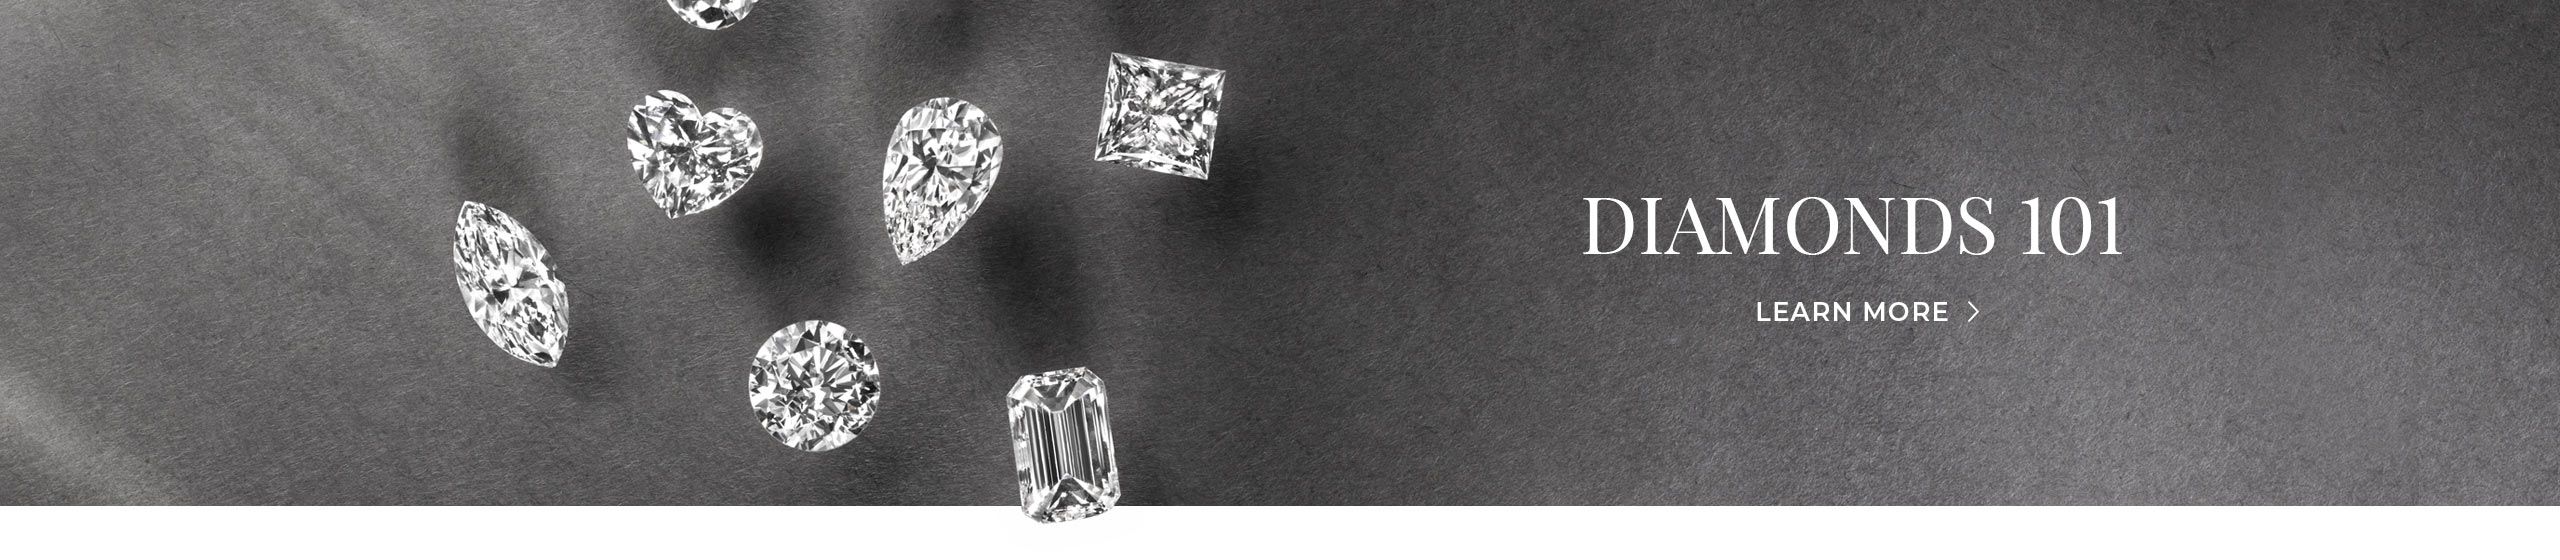 Collection of Six Diamonds in Different Shapes